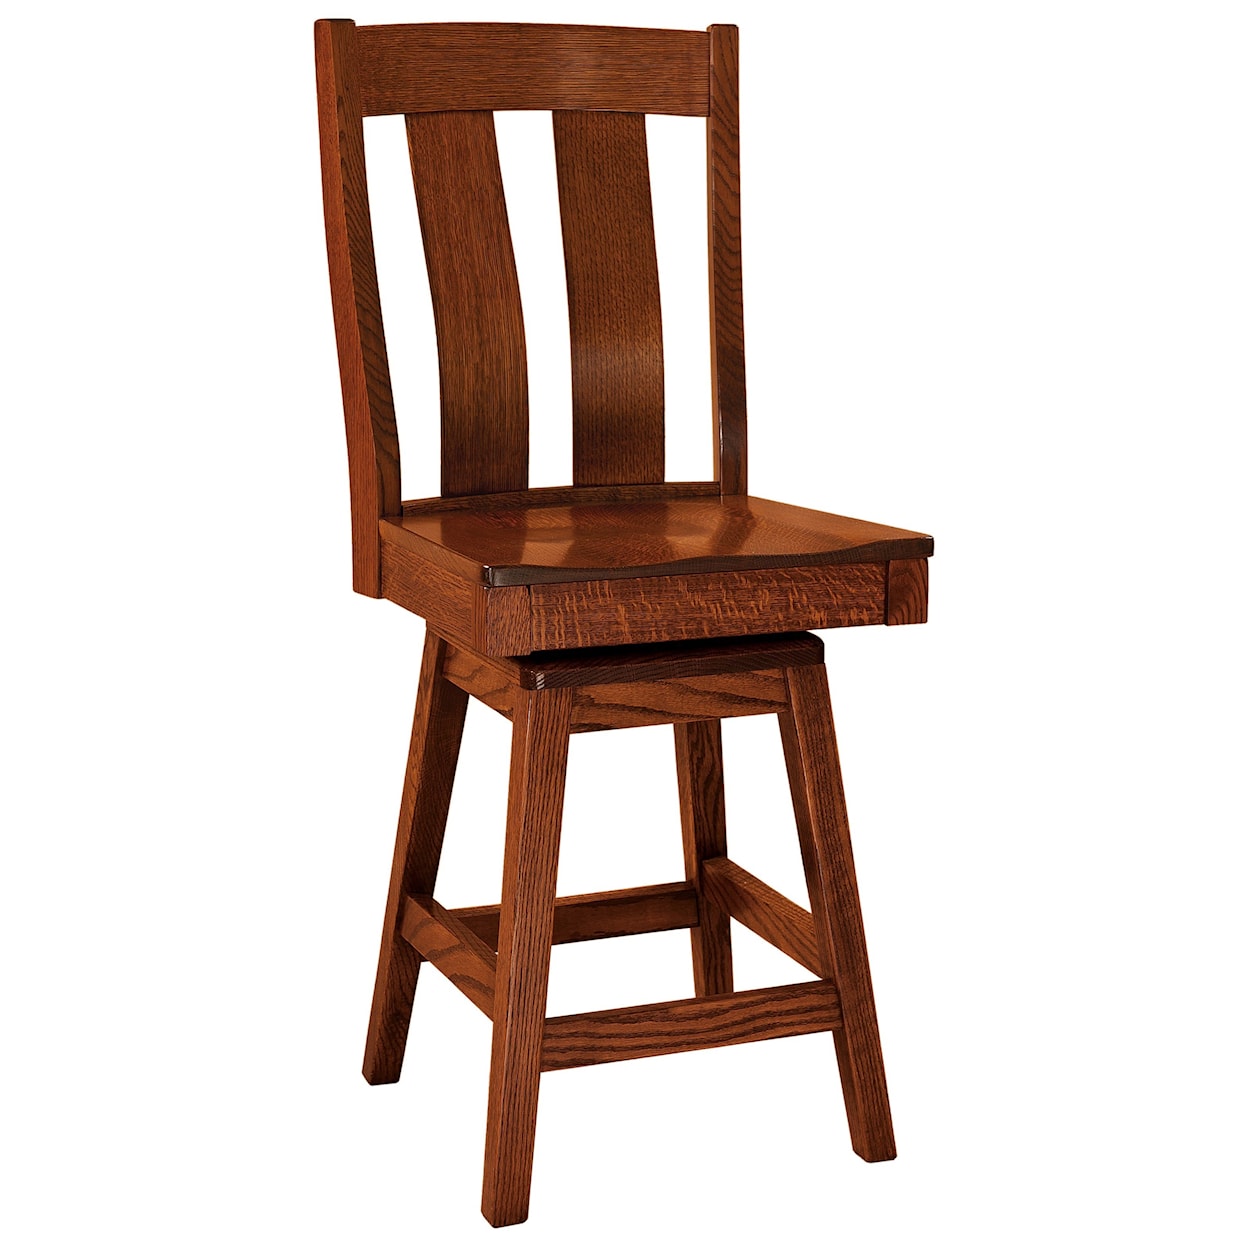 F&N Woodworking Laurie Swivel Counter Height Stool - Fabric Seat